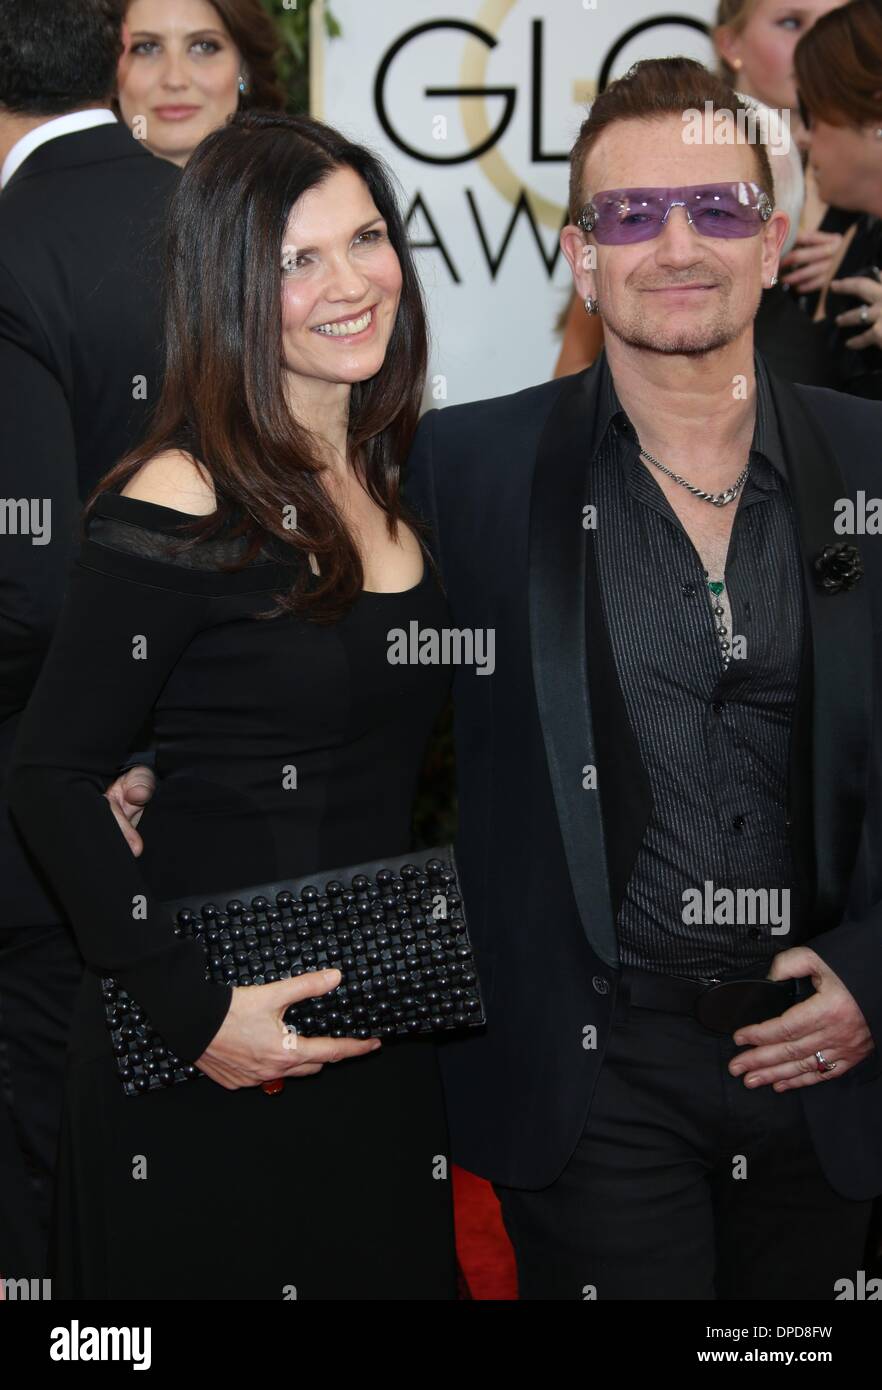 Los Angeles, USA. 12th January 2014. Bono and wife Ali Hewson attend the 71st Annual Golden Globe Awards aka Golden Globes at Hotel Beverly Hilton in Los Angeles, USA, on 12 January 2014. Photo: Hubert Boesl/dpa/Alamy Live News  Stock Photo